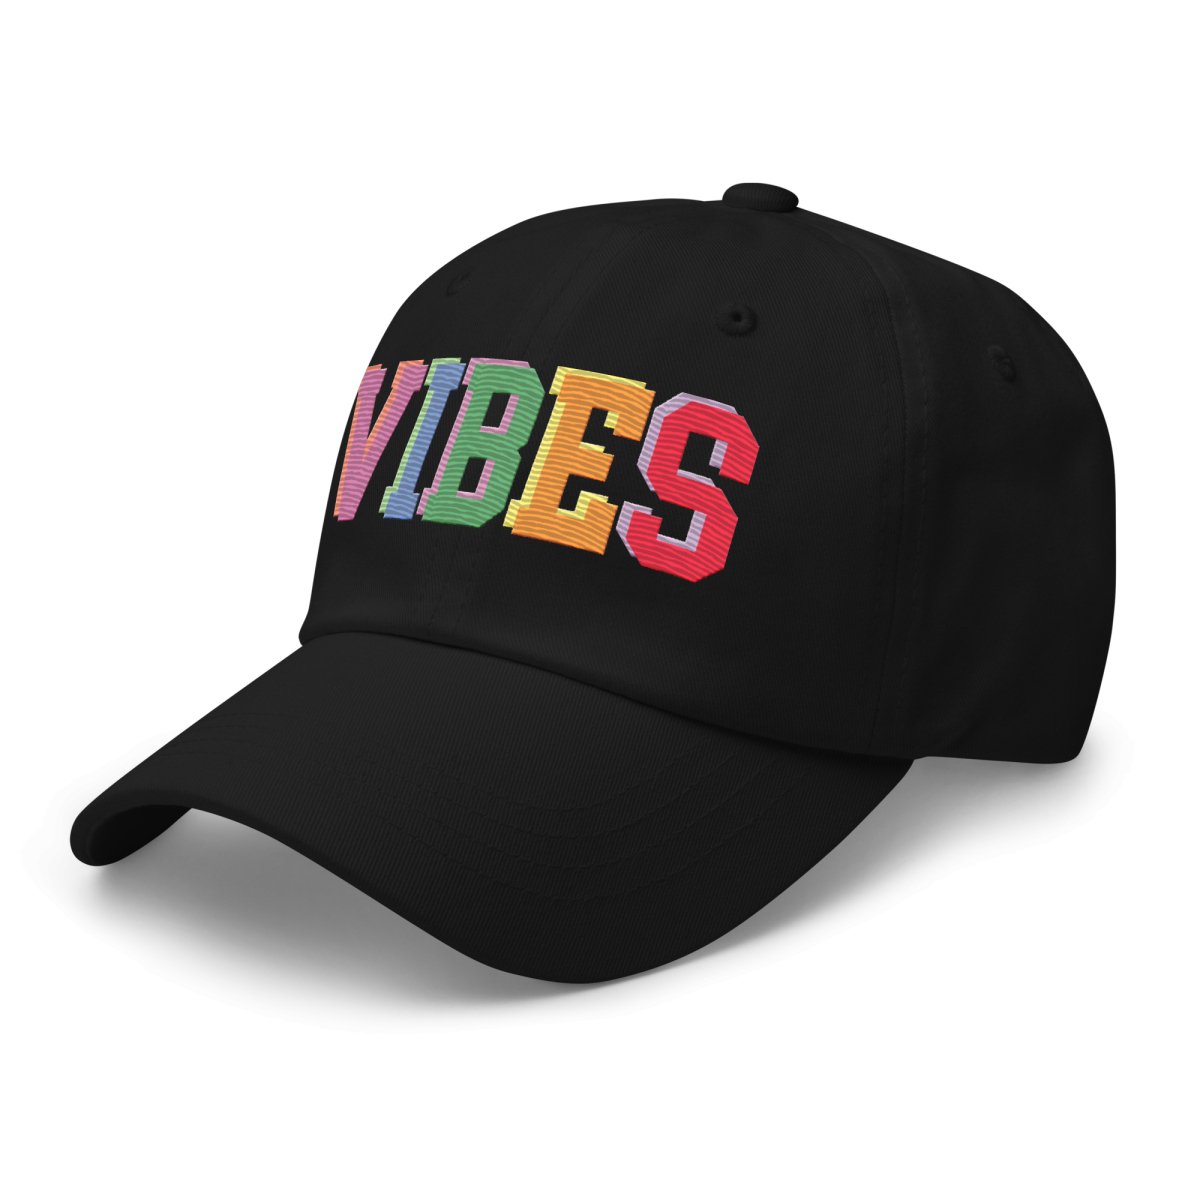 'Vibes' Embroidered Hat - United Monograms